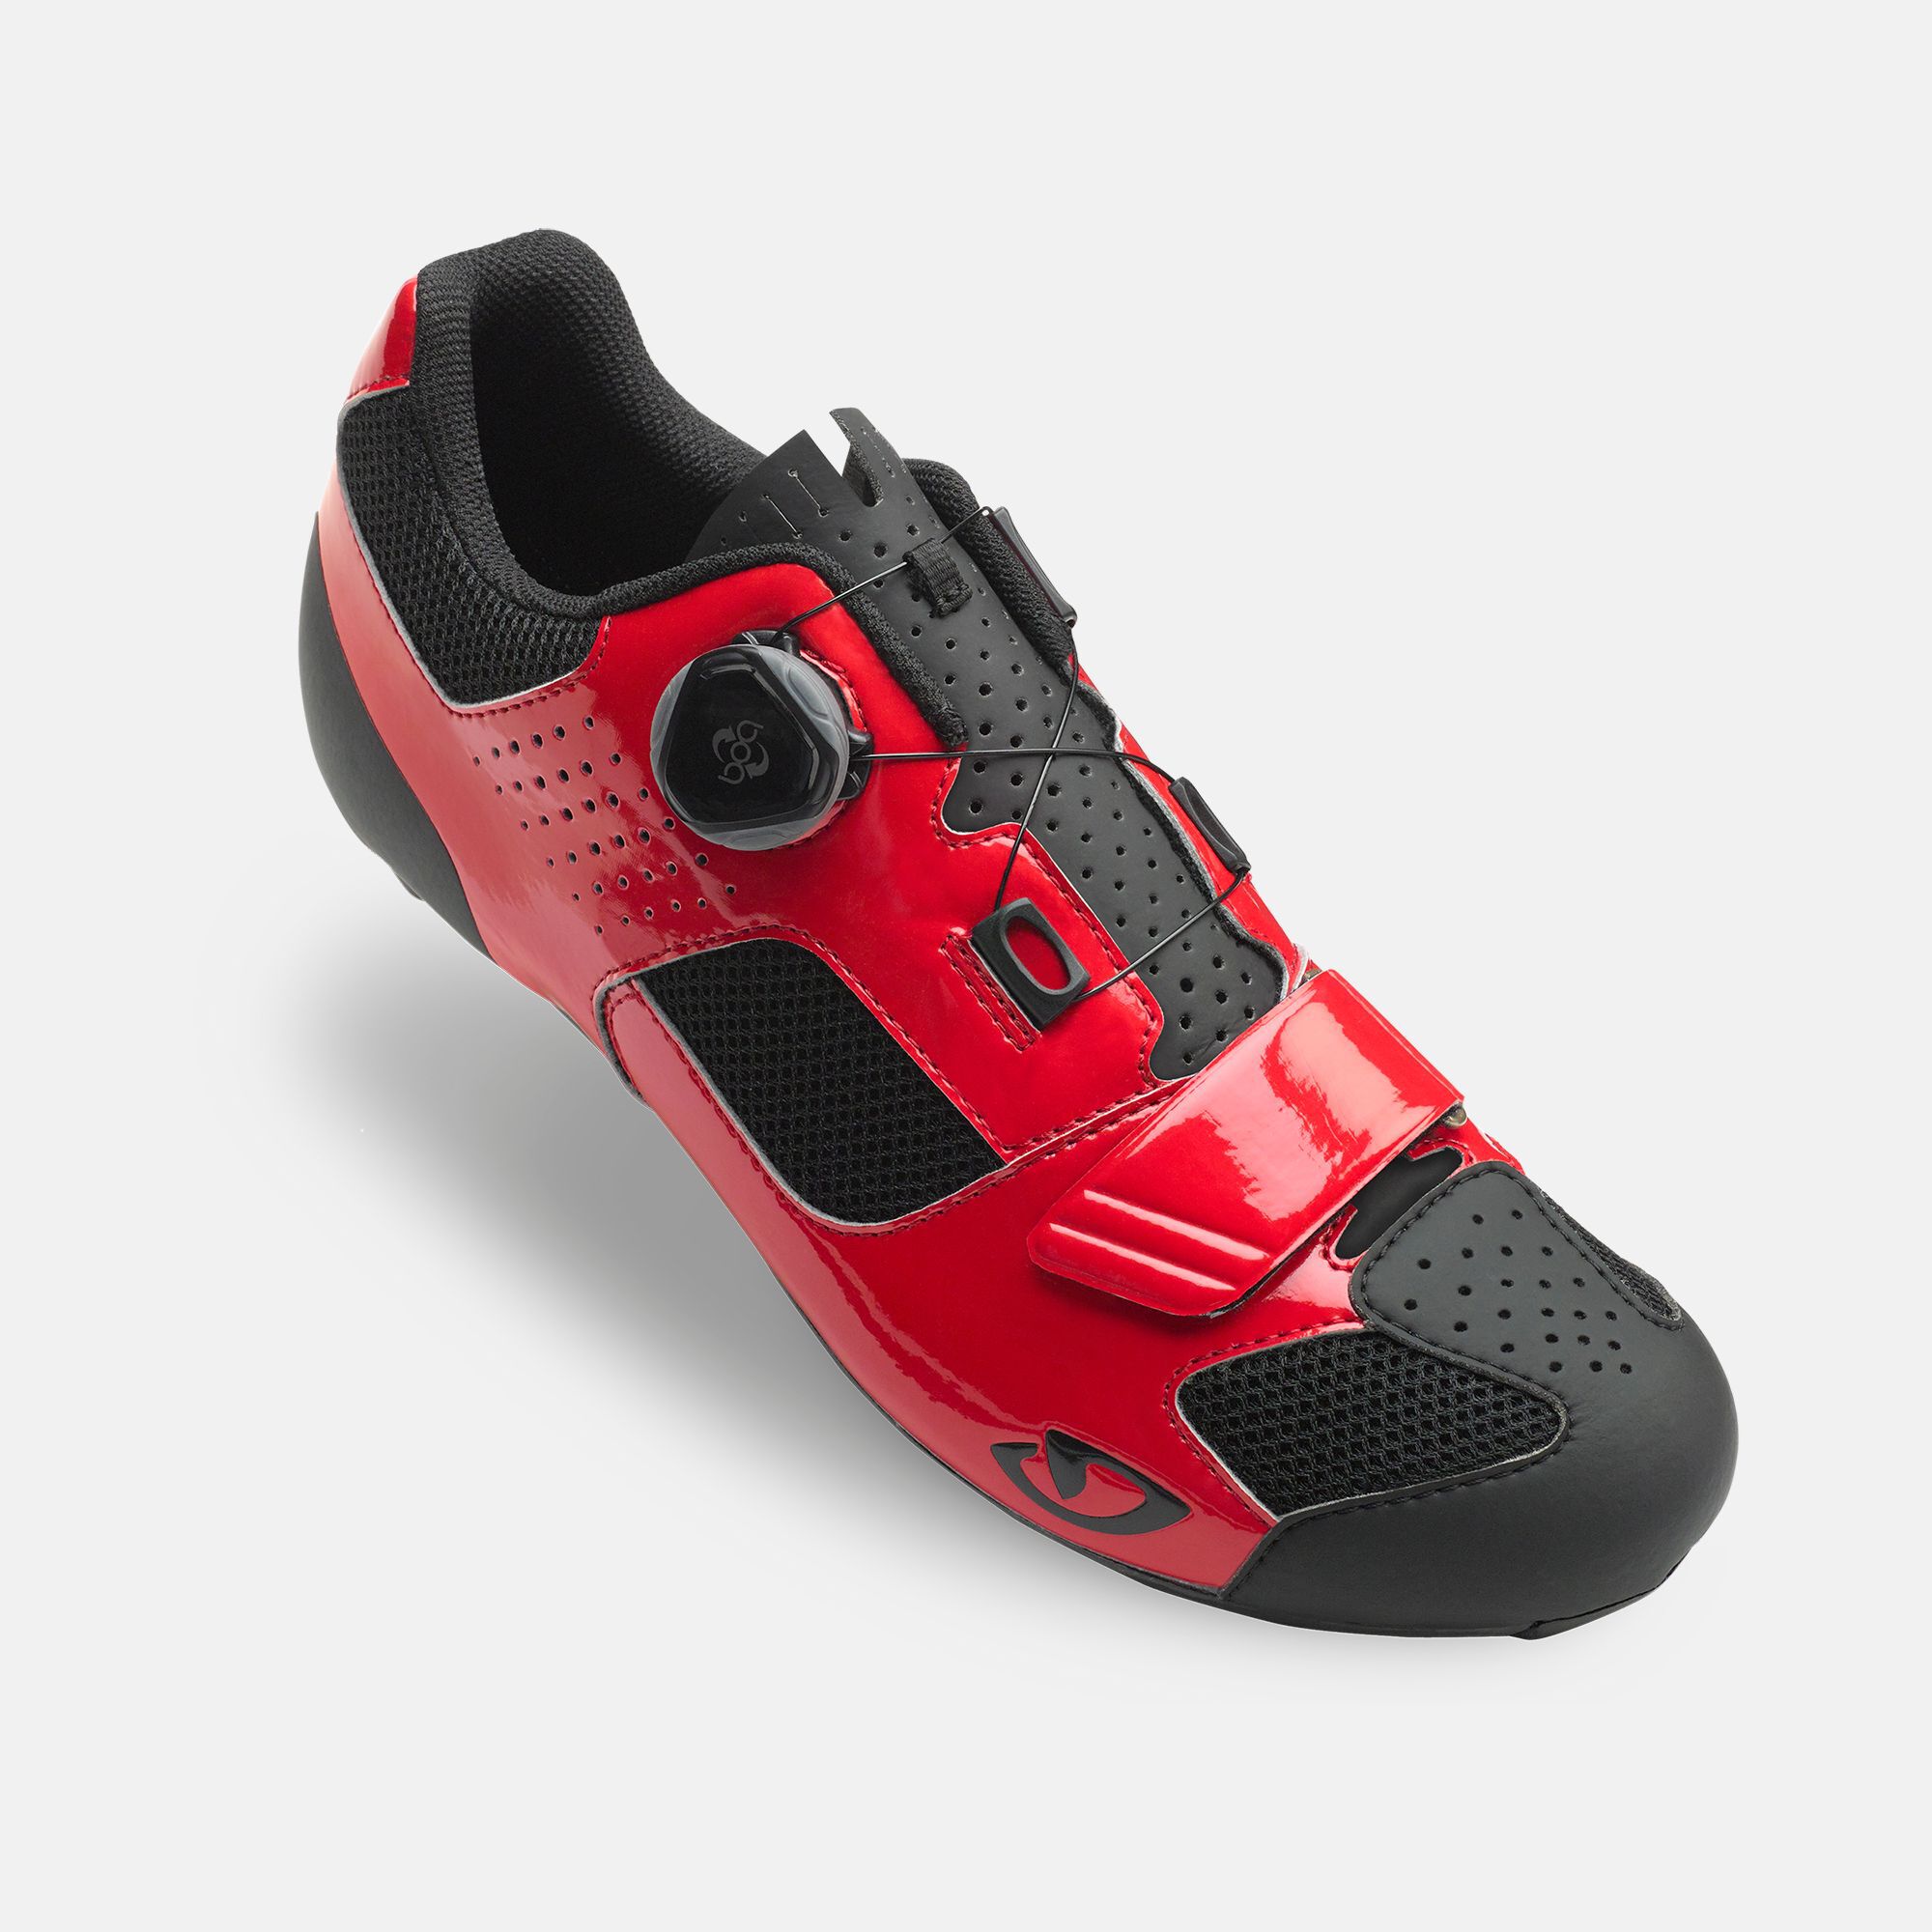 show original title Details about   Giro trans boa cycling shoes road bike black red piano lacquer 